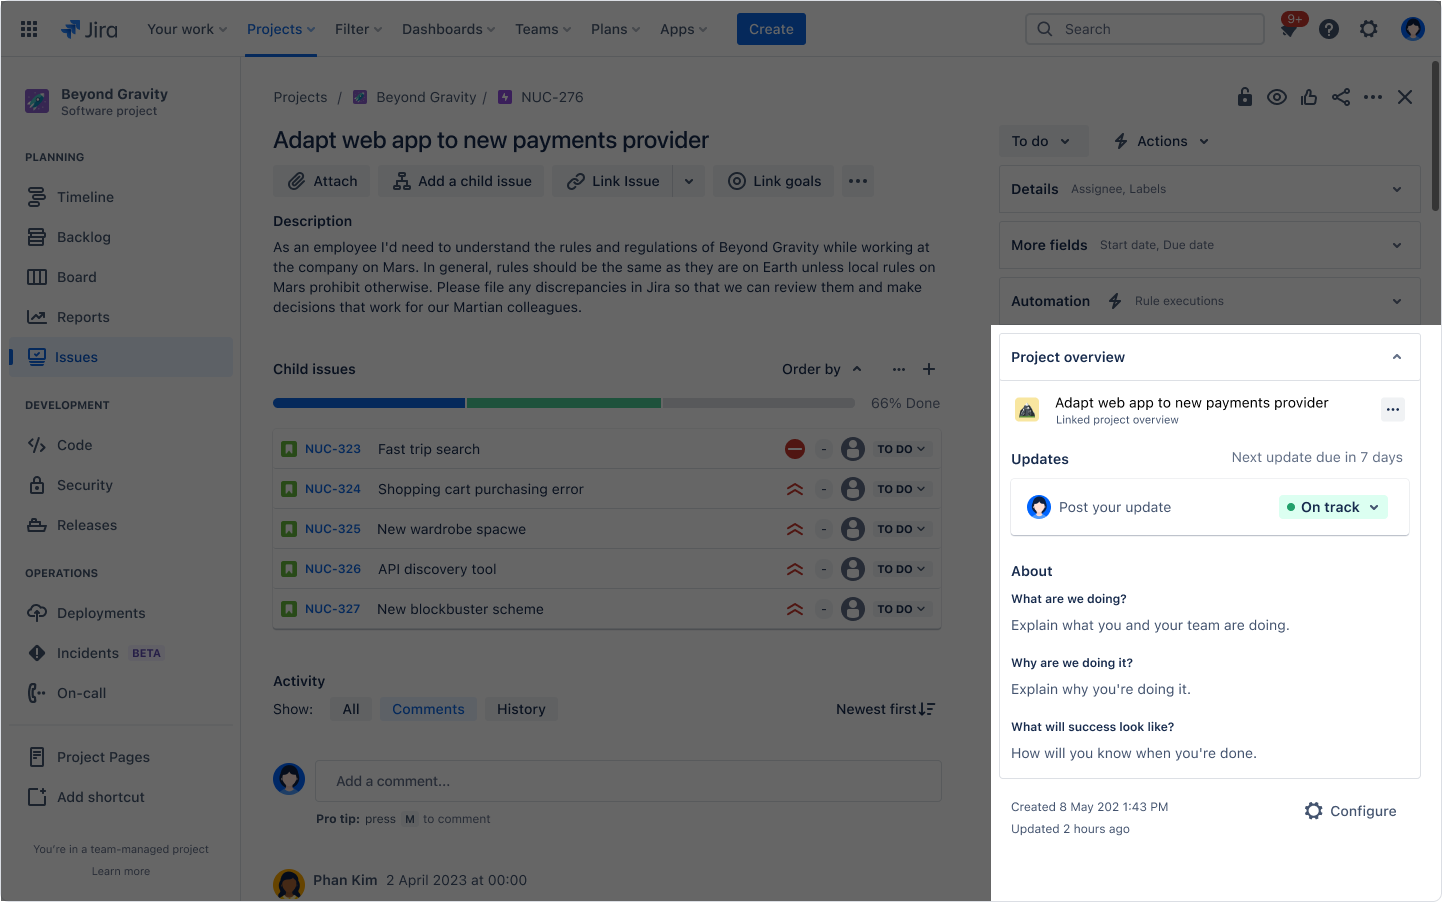 Jira issue view highlighting the project overview section